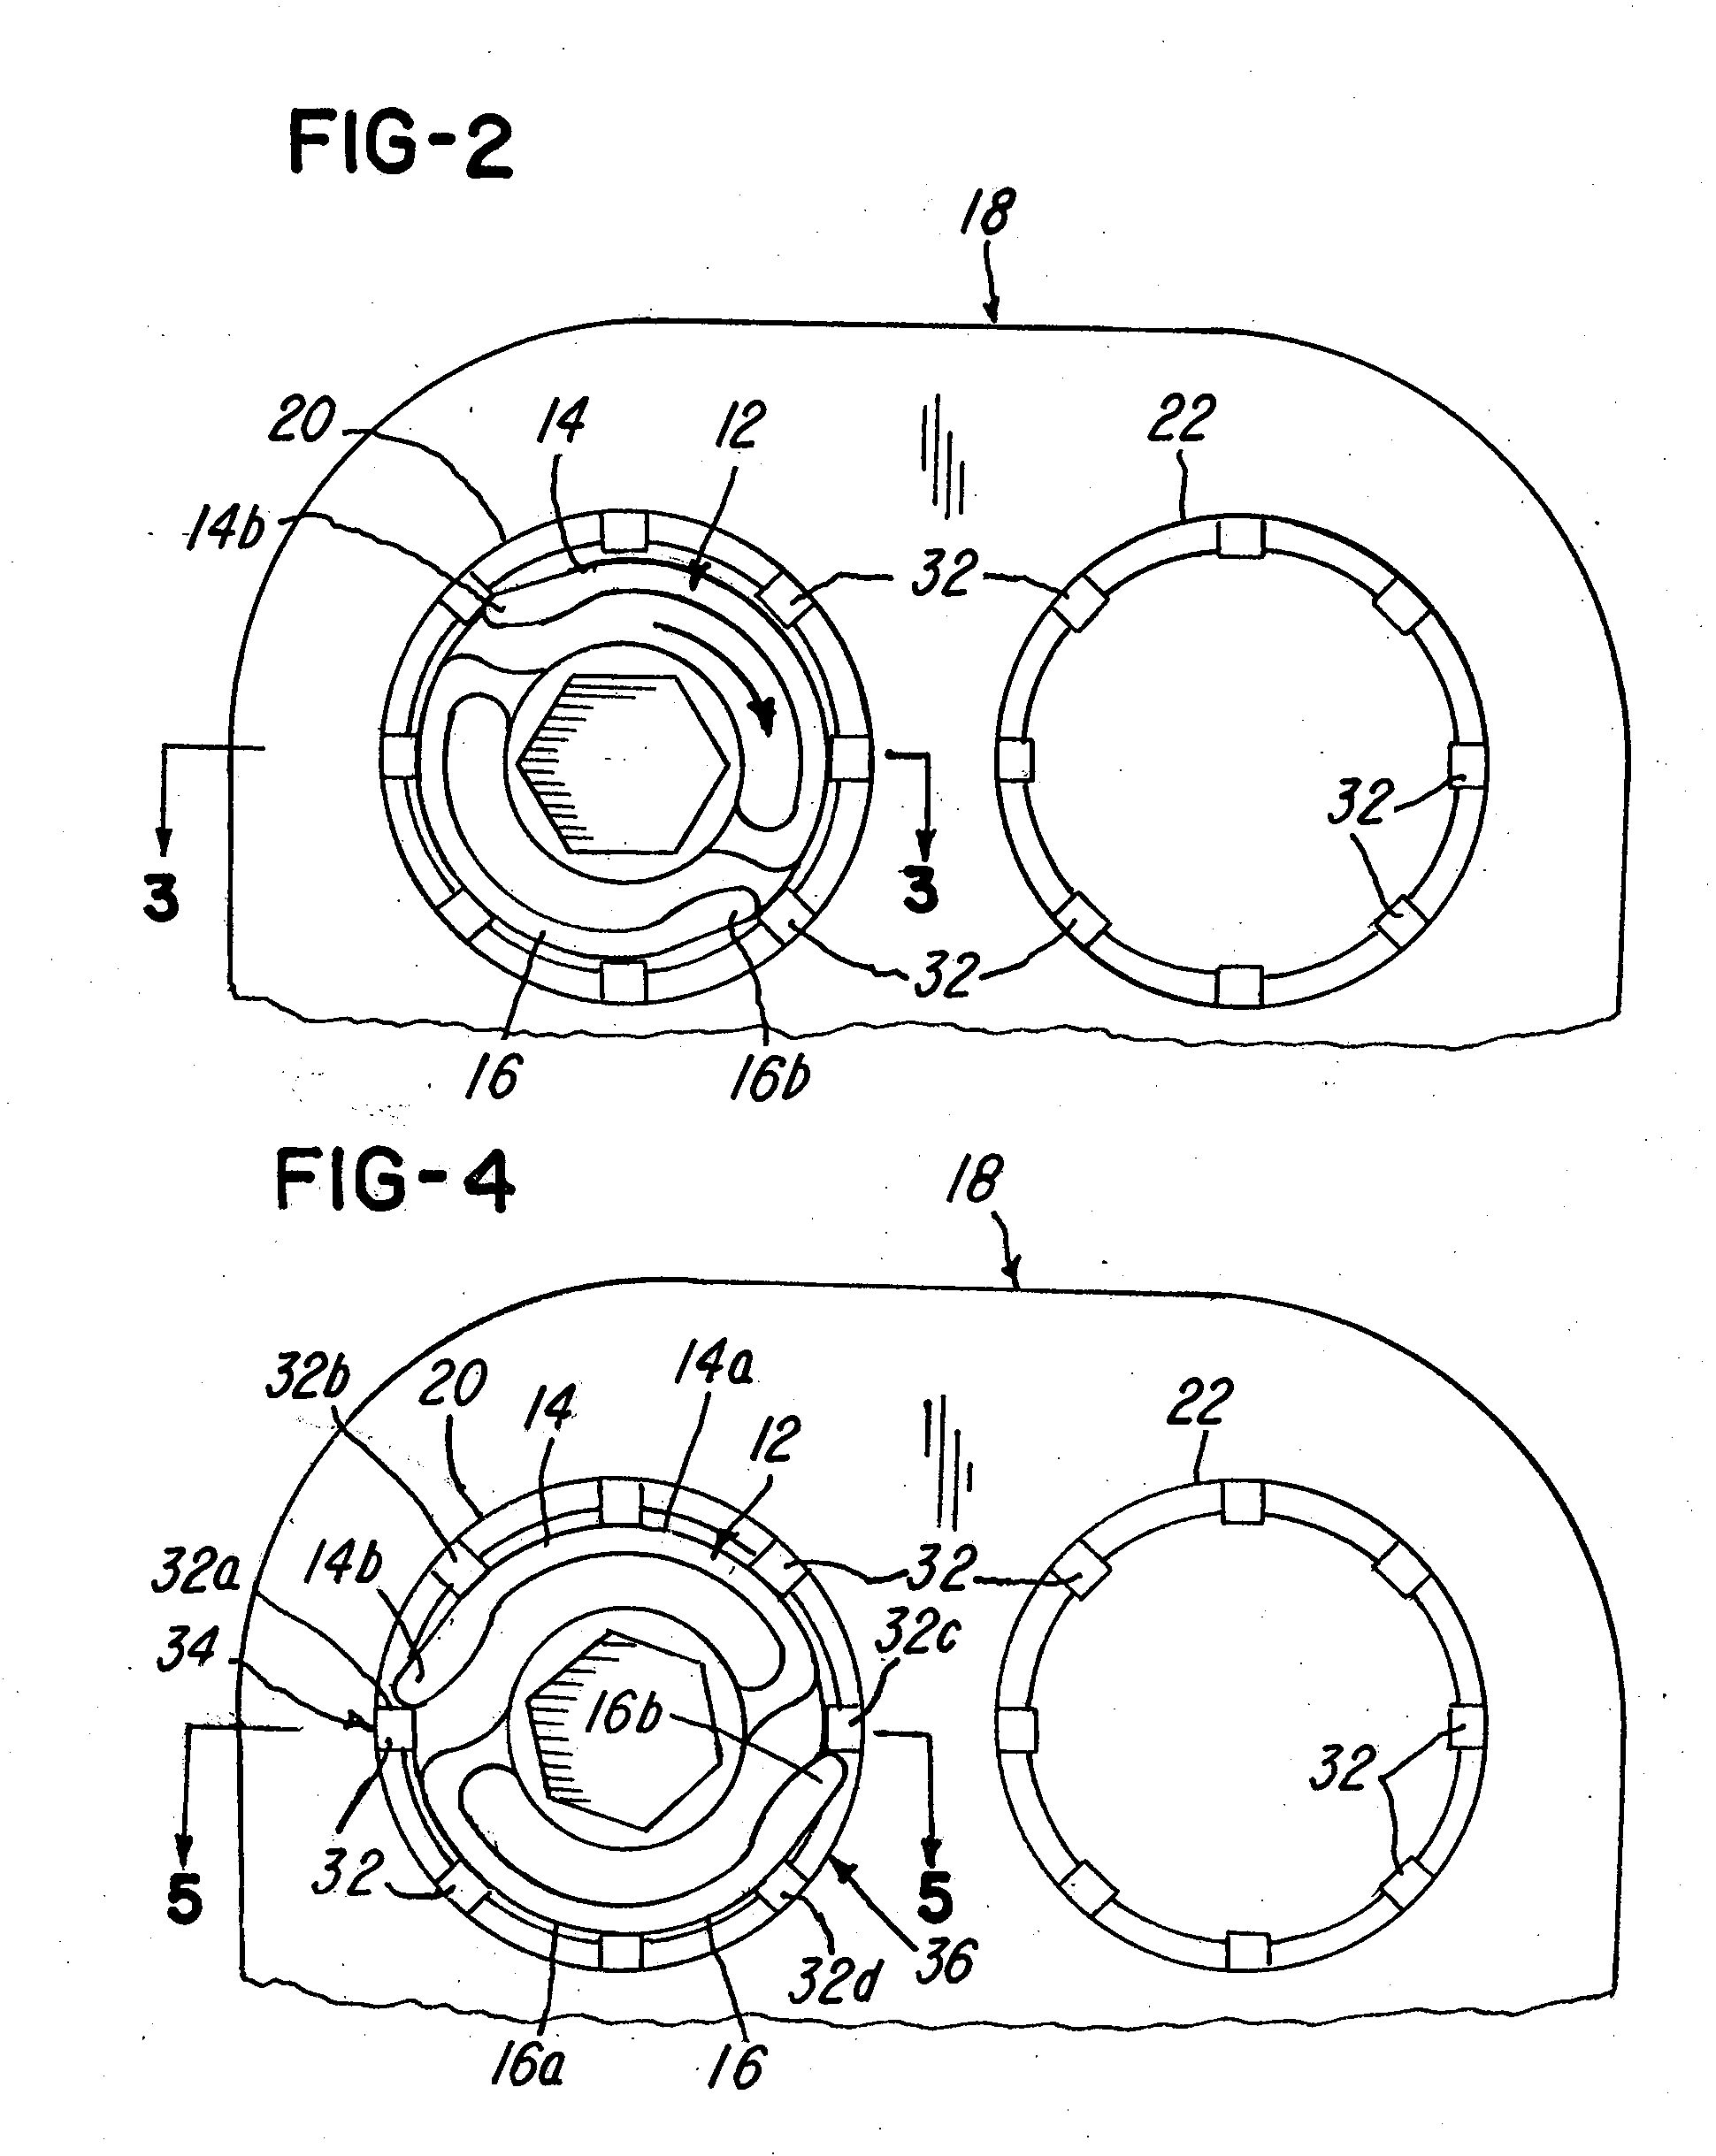 Implant plate screw locking system and screw having a locking member